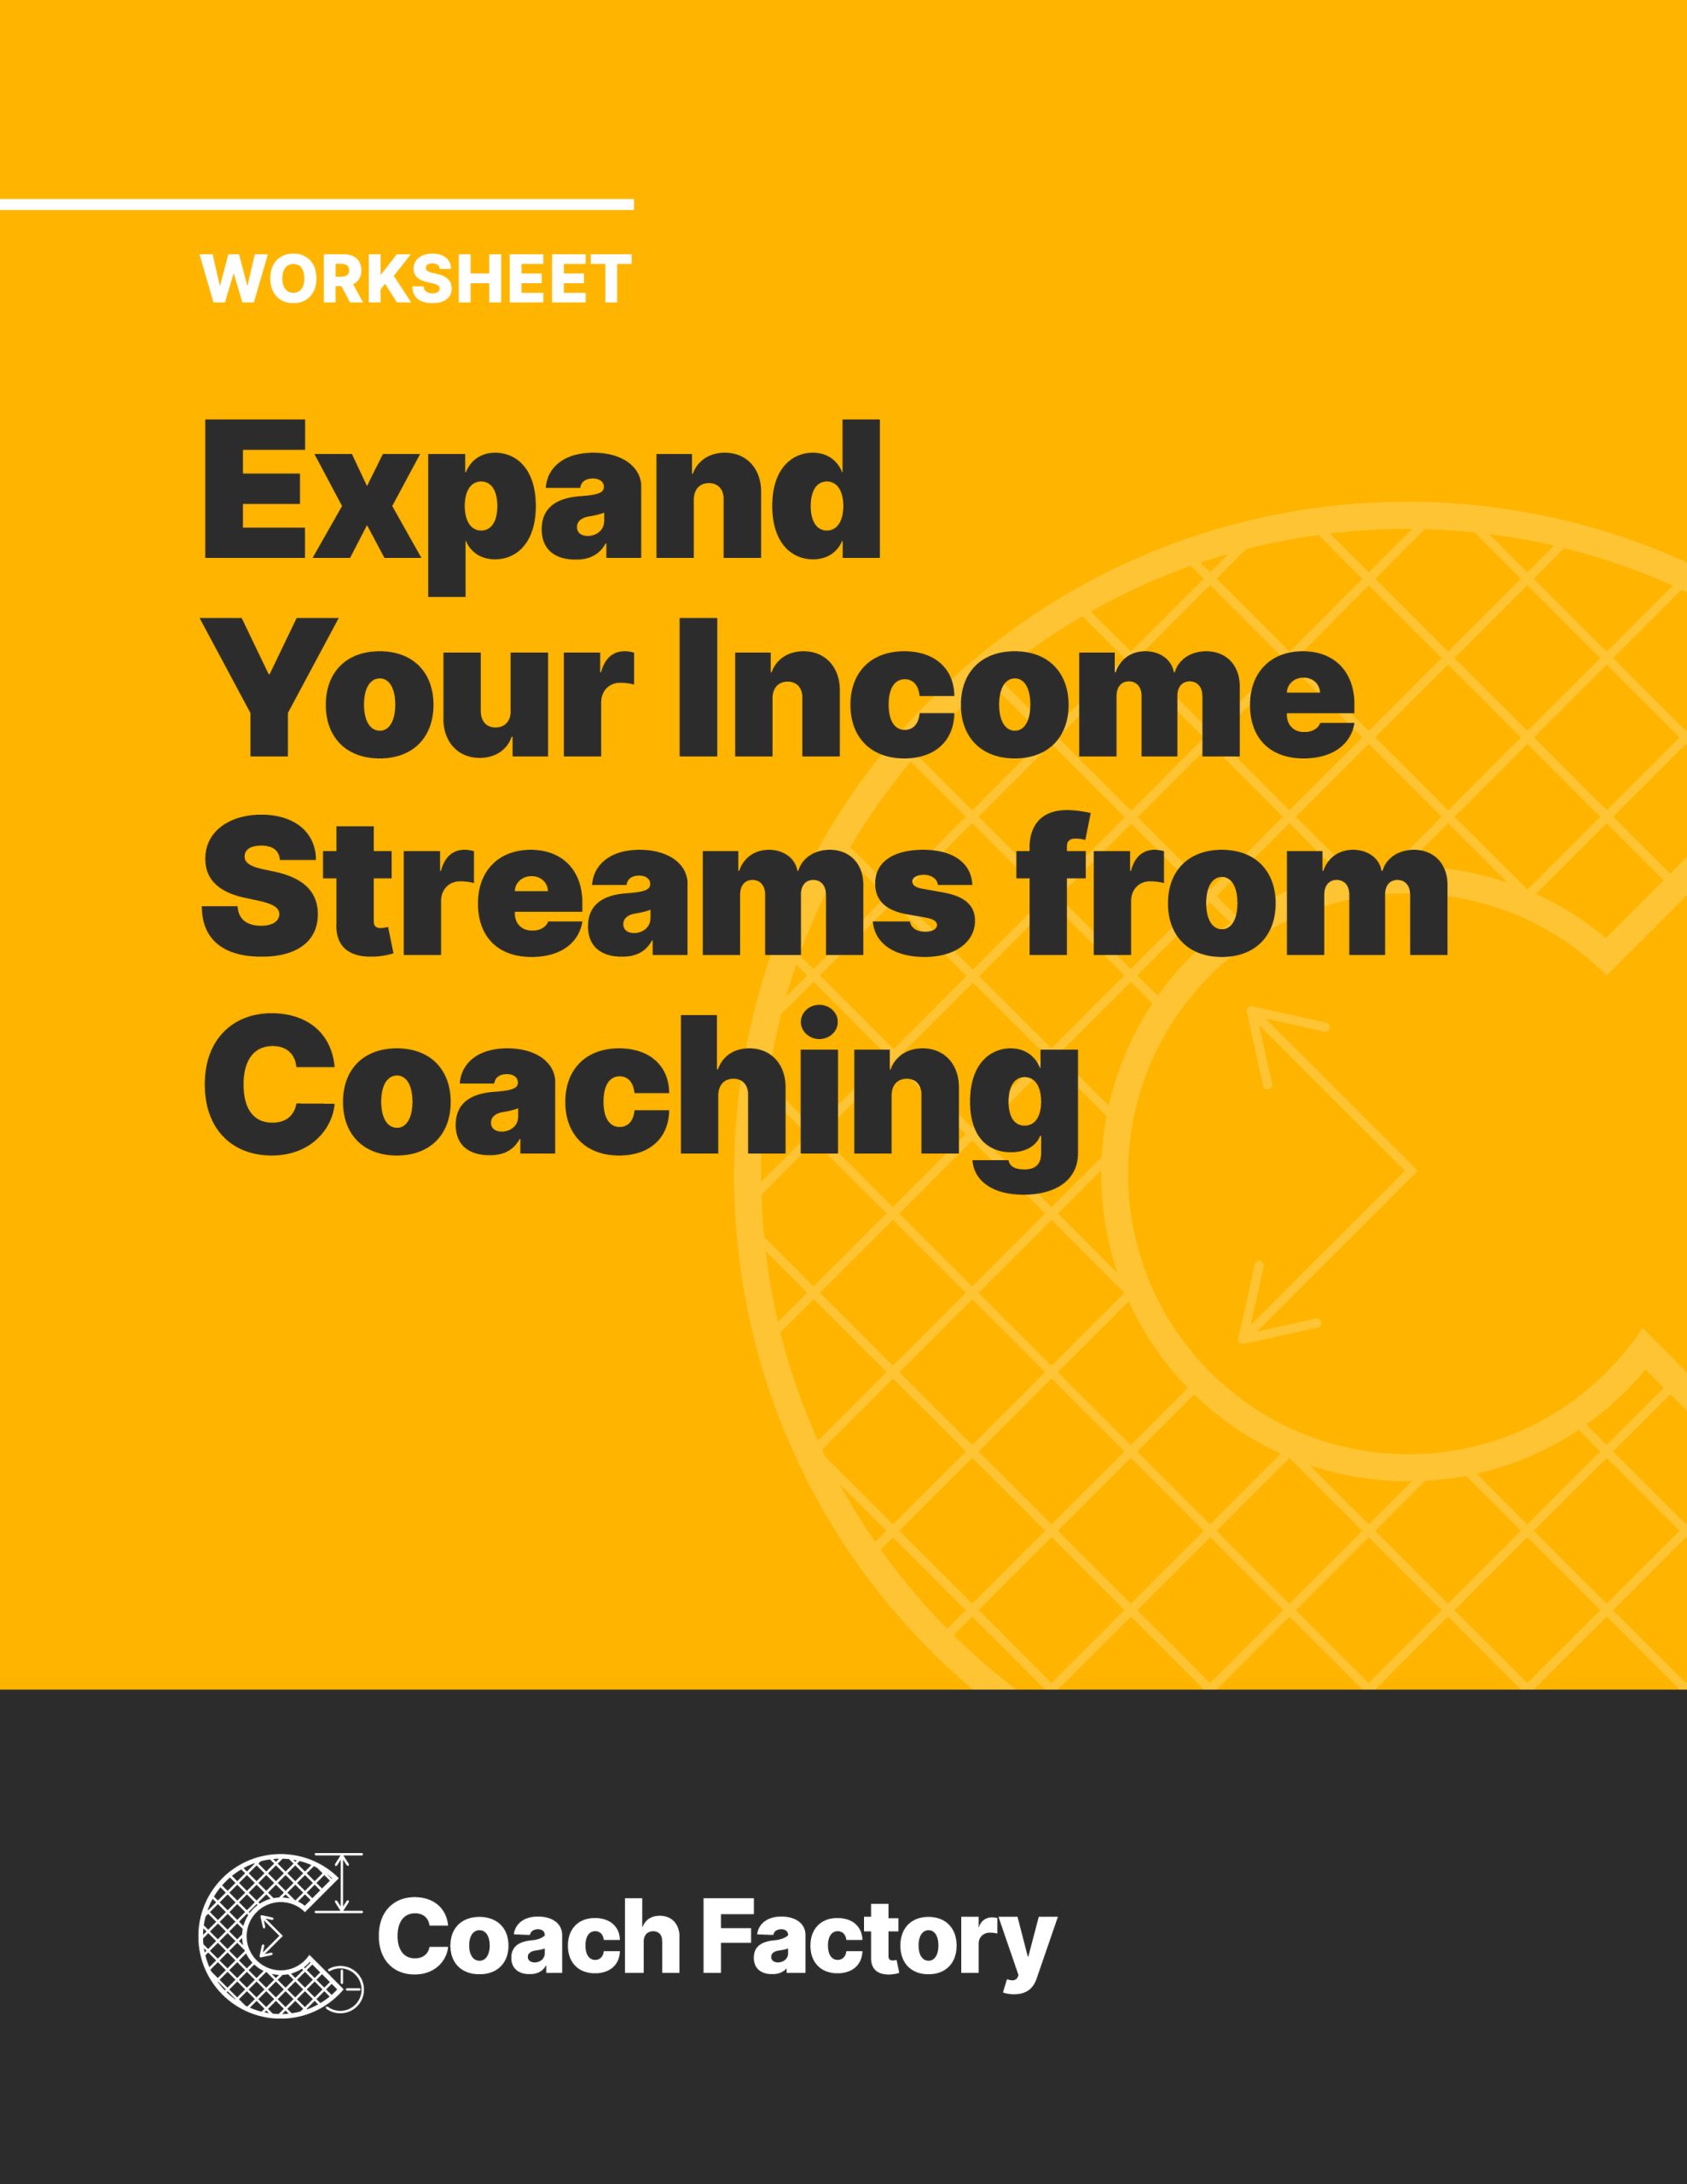 Worksheet Expand Your Income Streams from Coaching